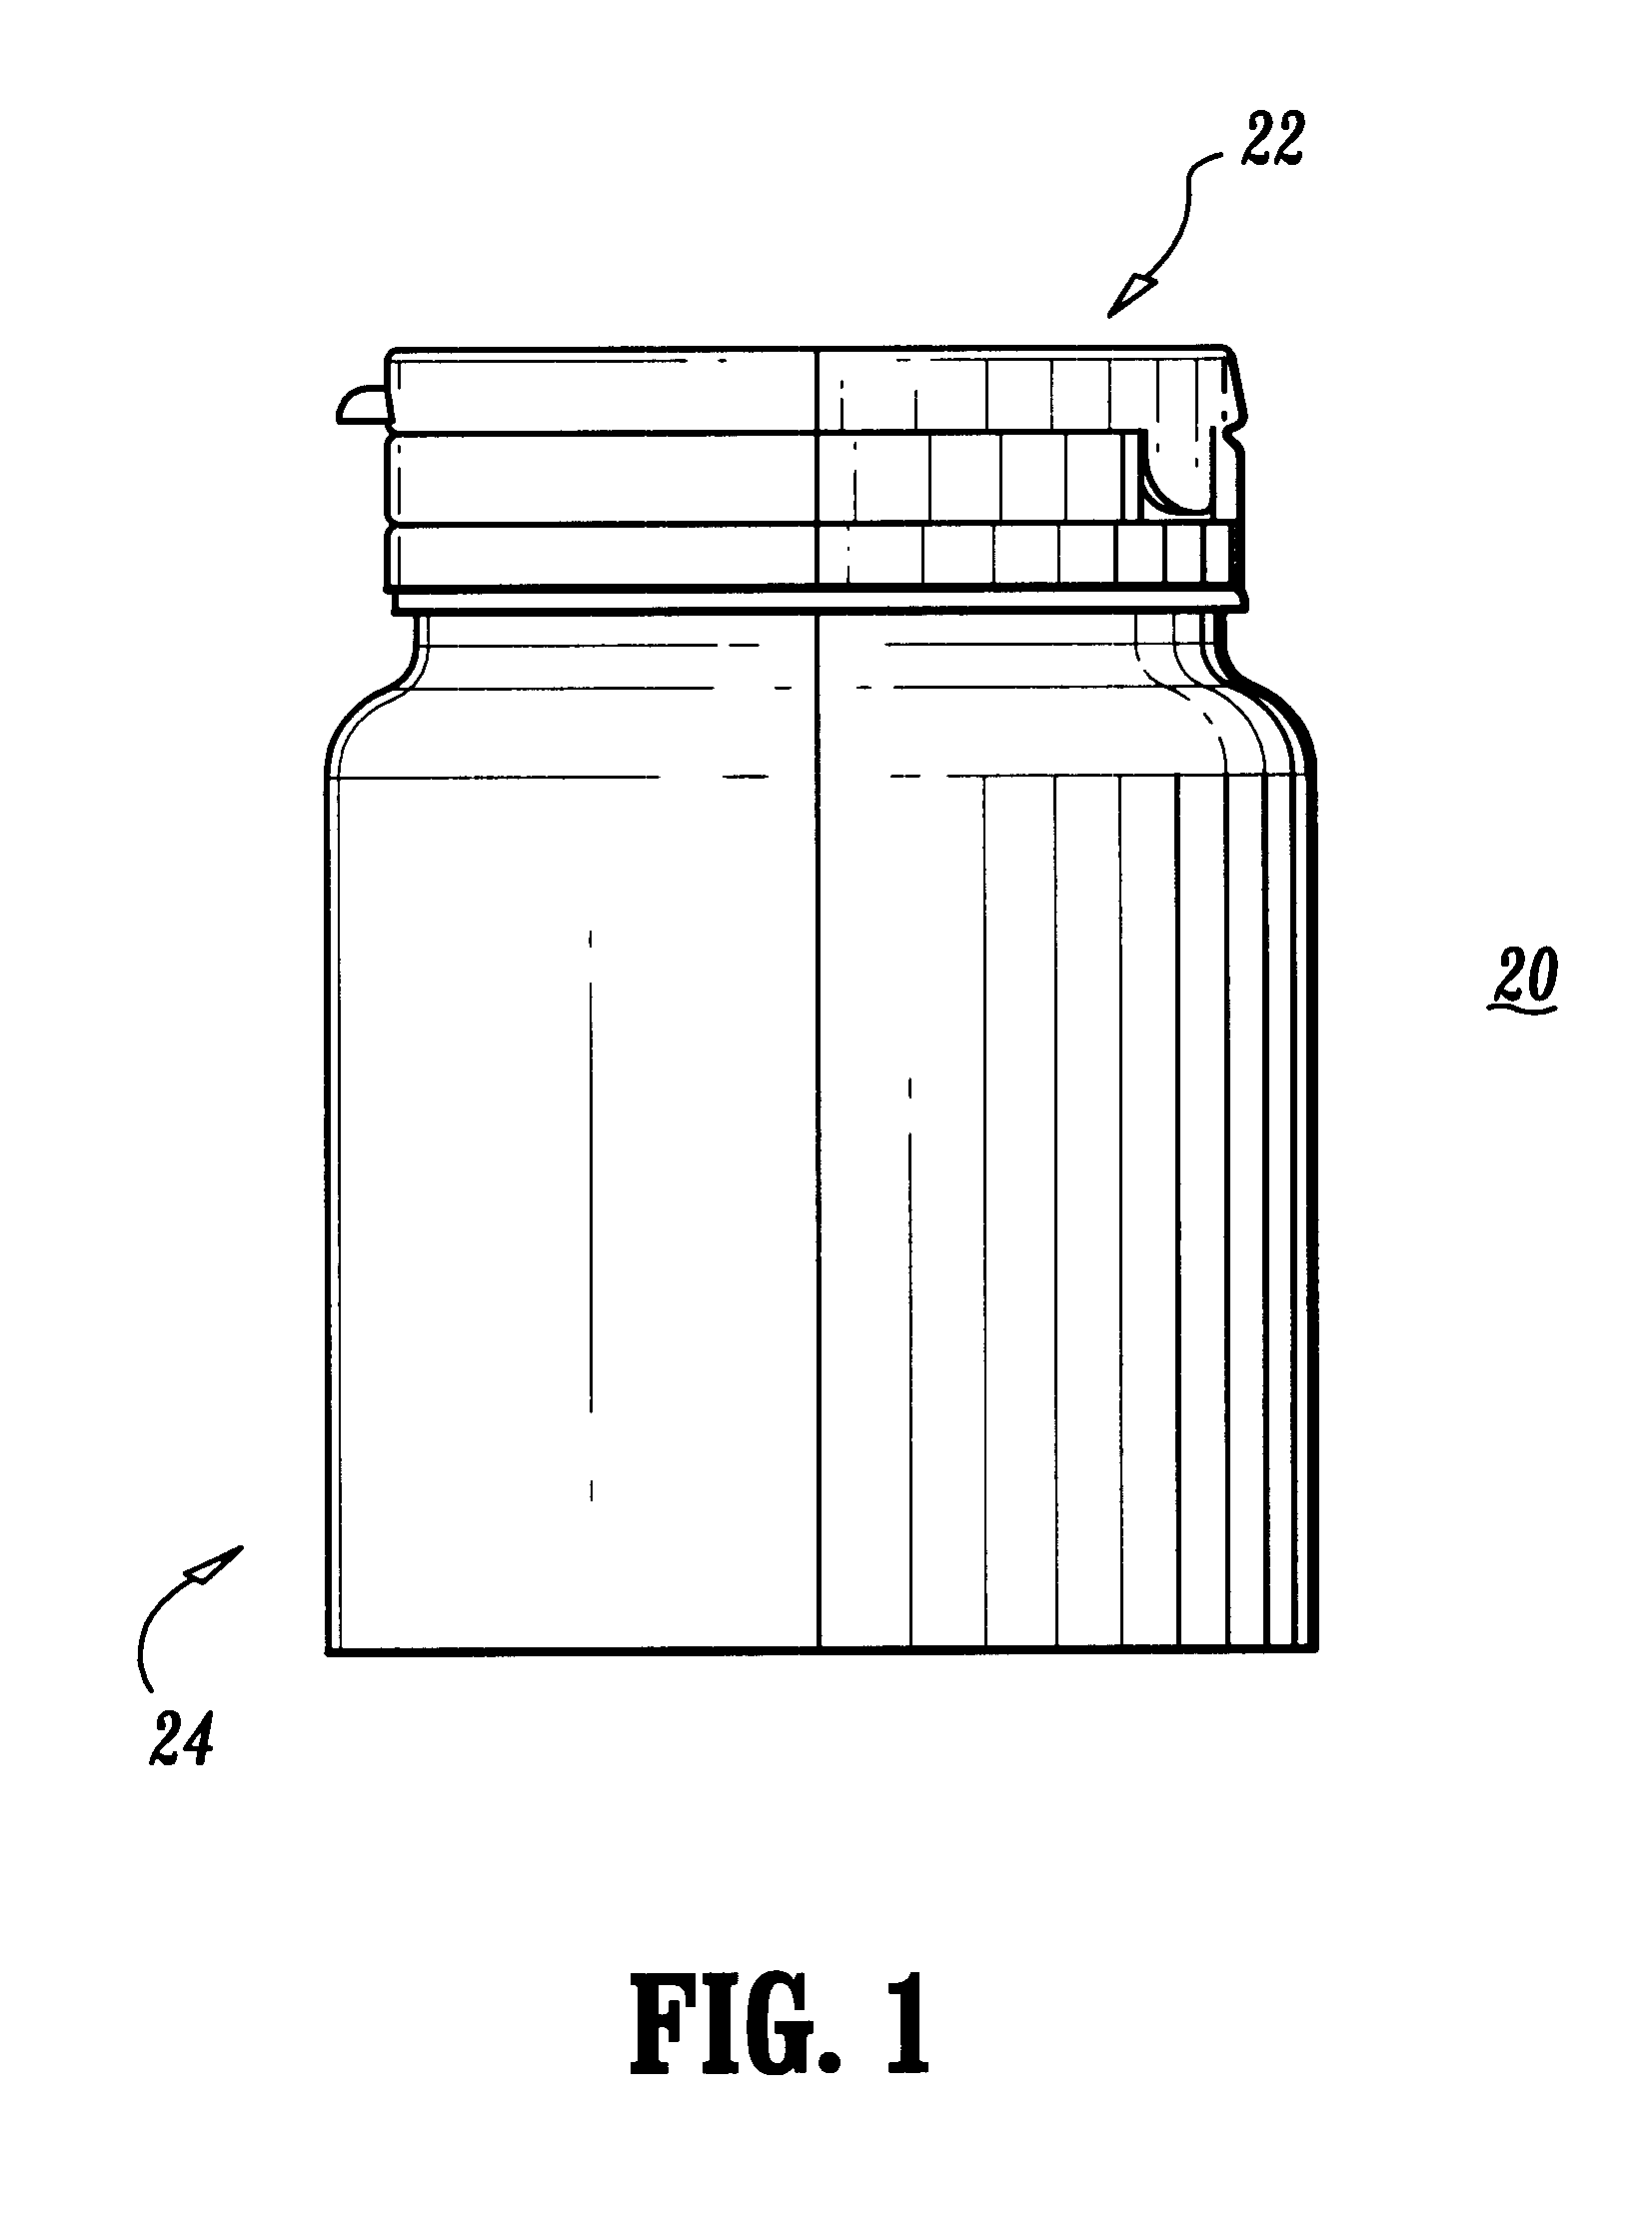 Product dispensing closure with lid support